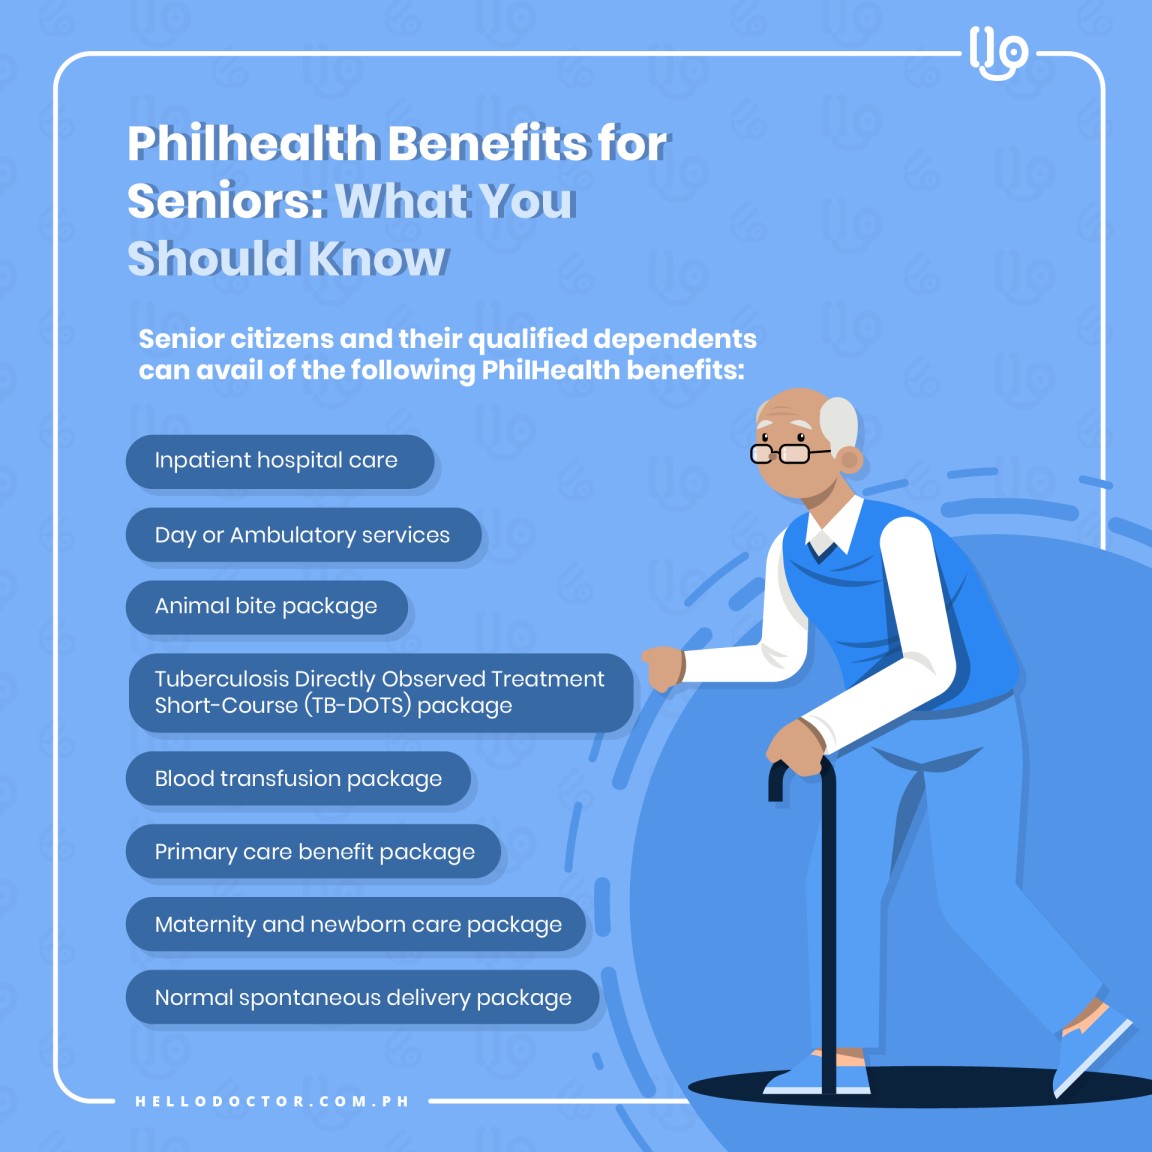 PhilHealth Benefits for Seniors: What You Need to Know